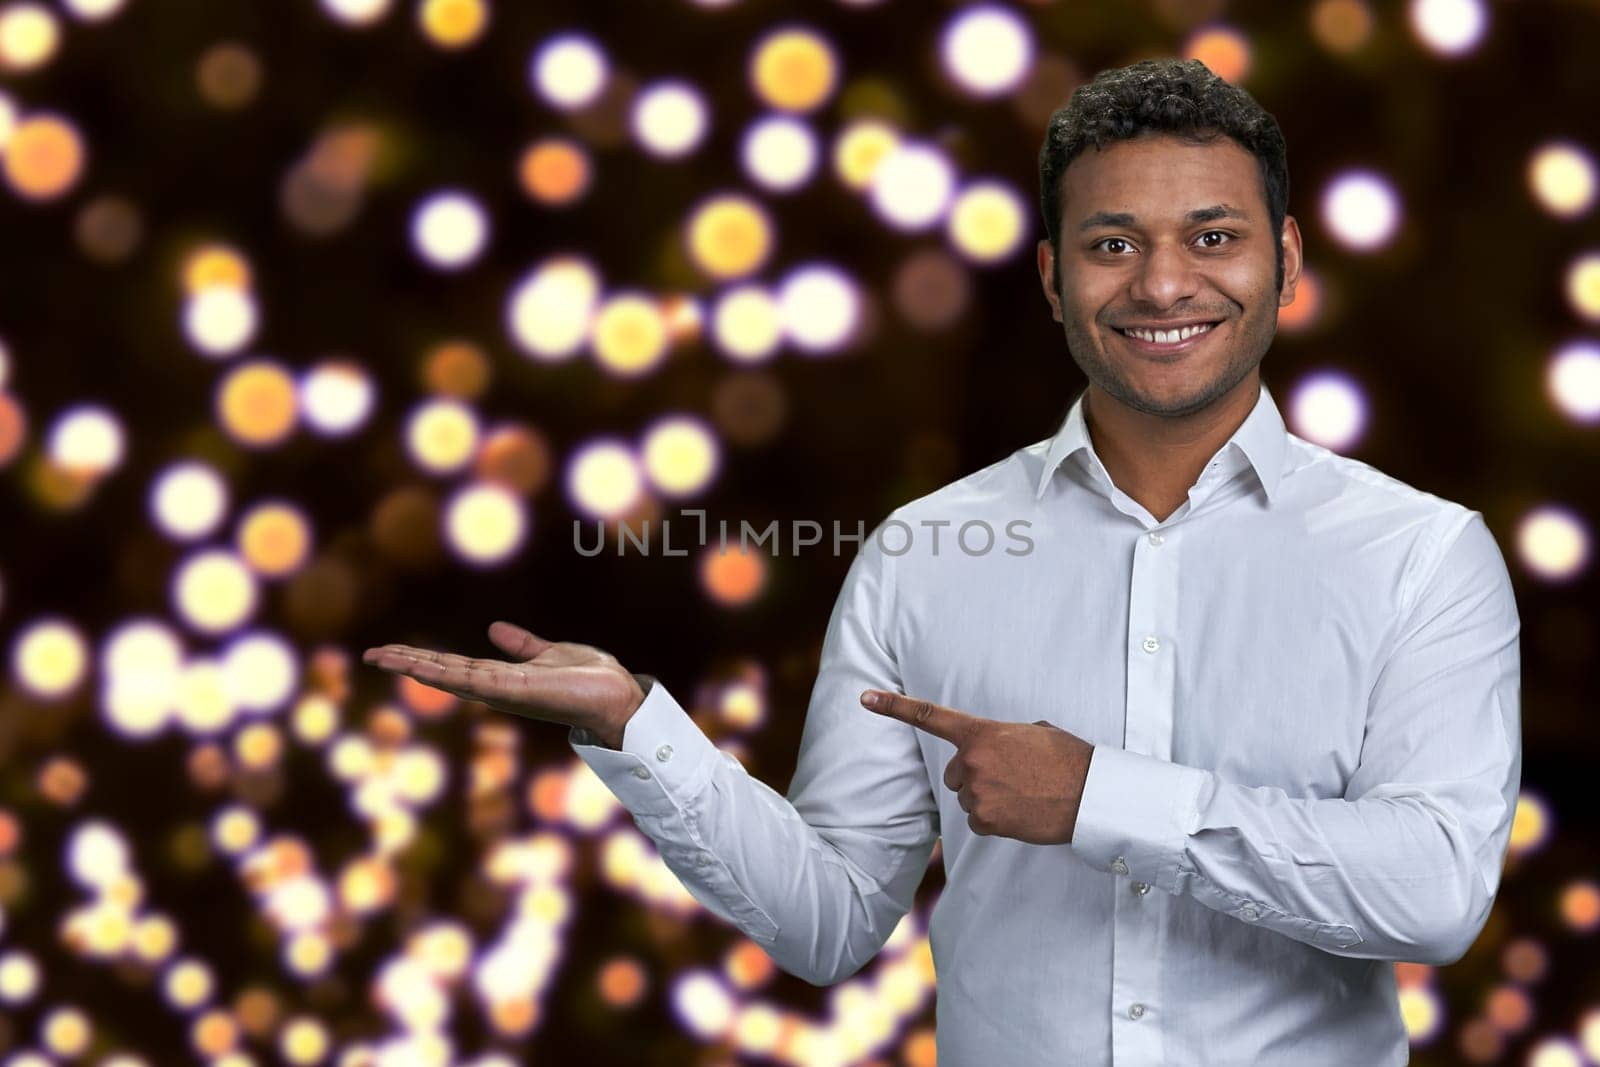 Handsome man looking at camera while presenting something on festive bokeh background. Christmas holiday deal.